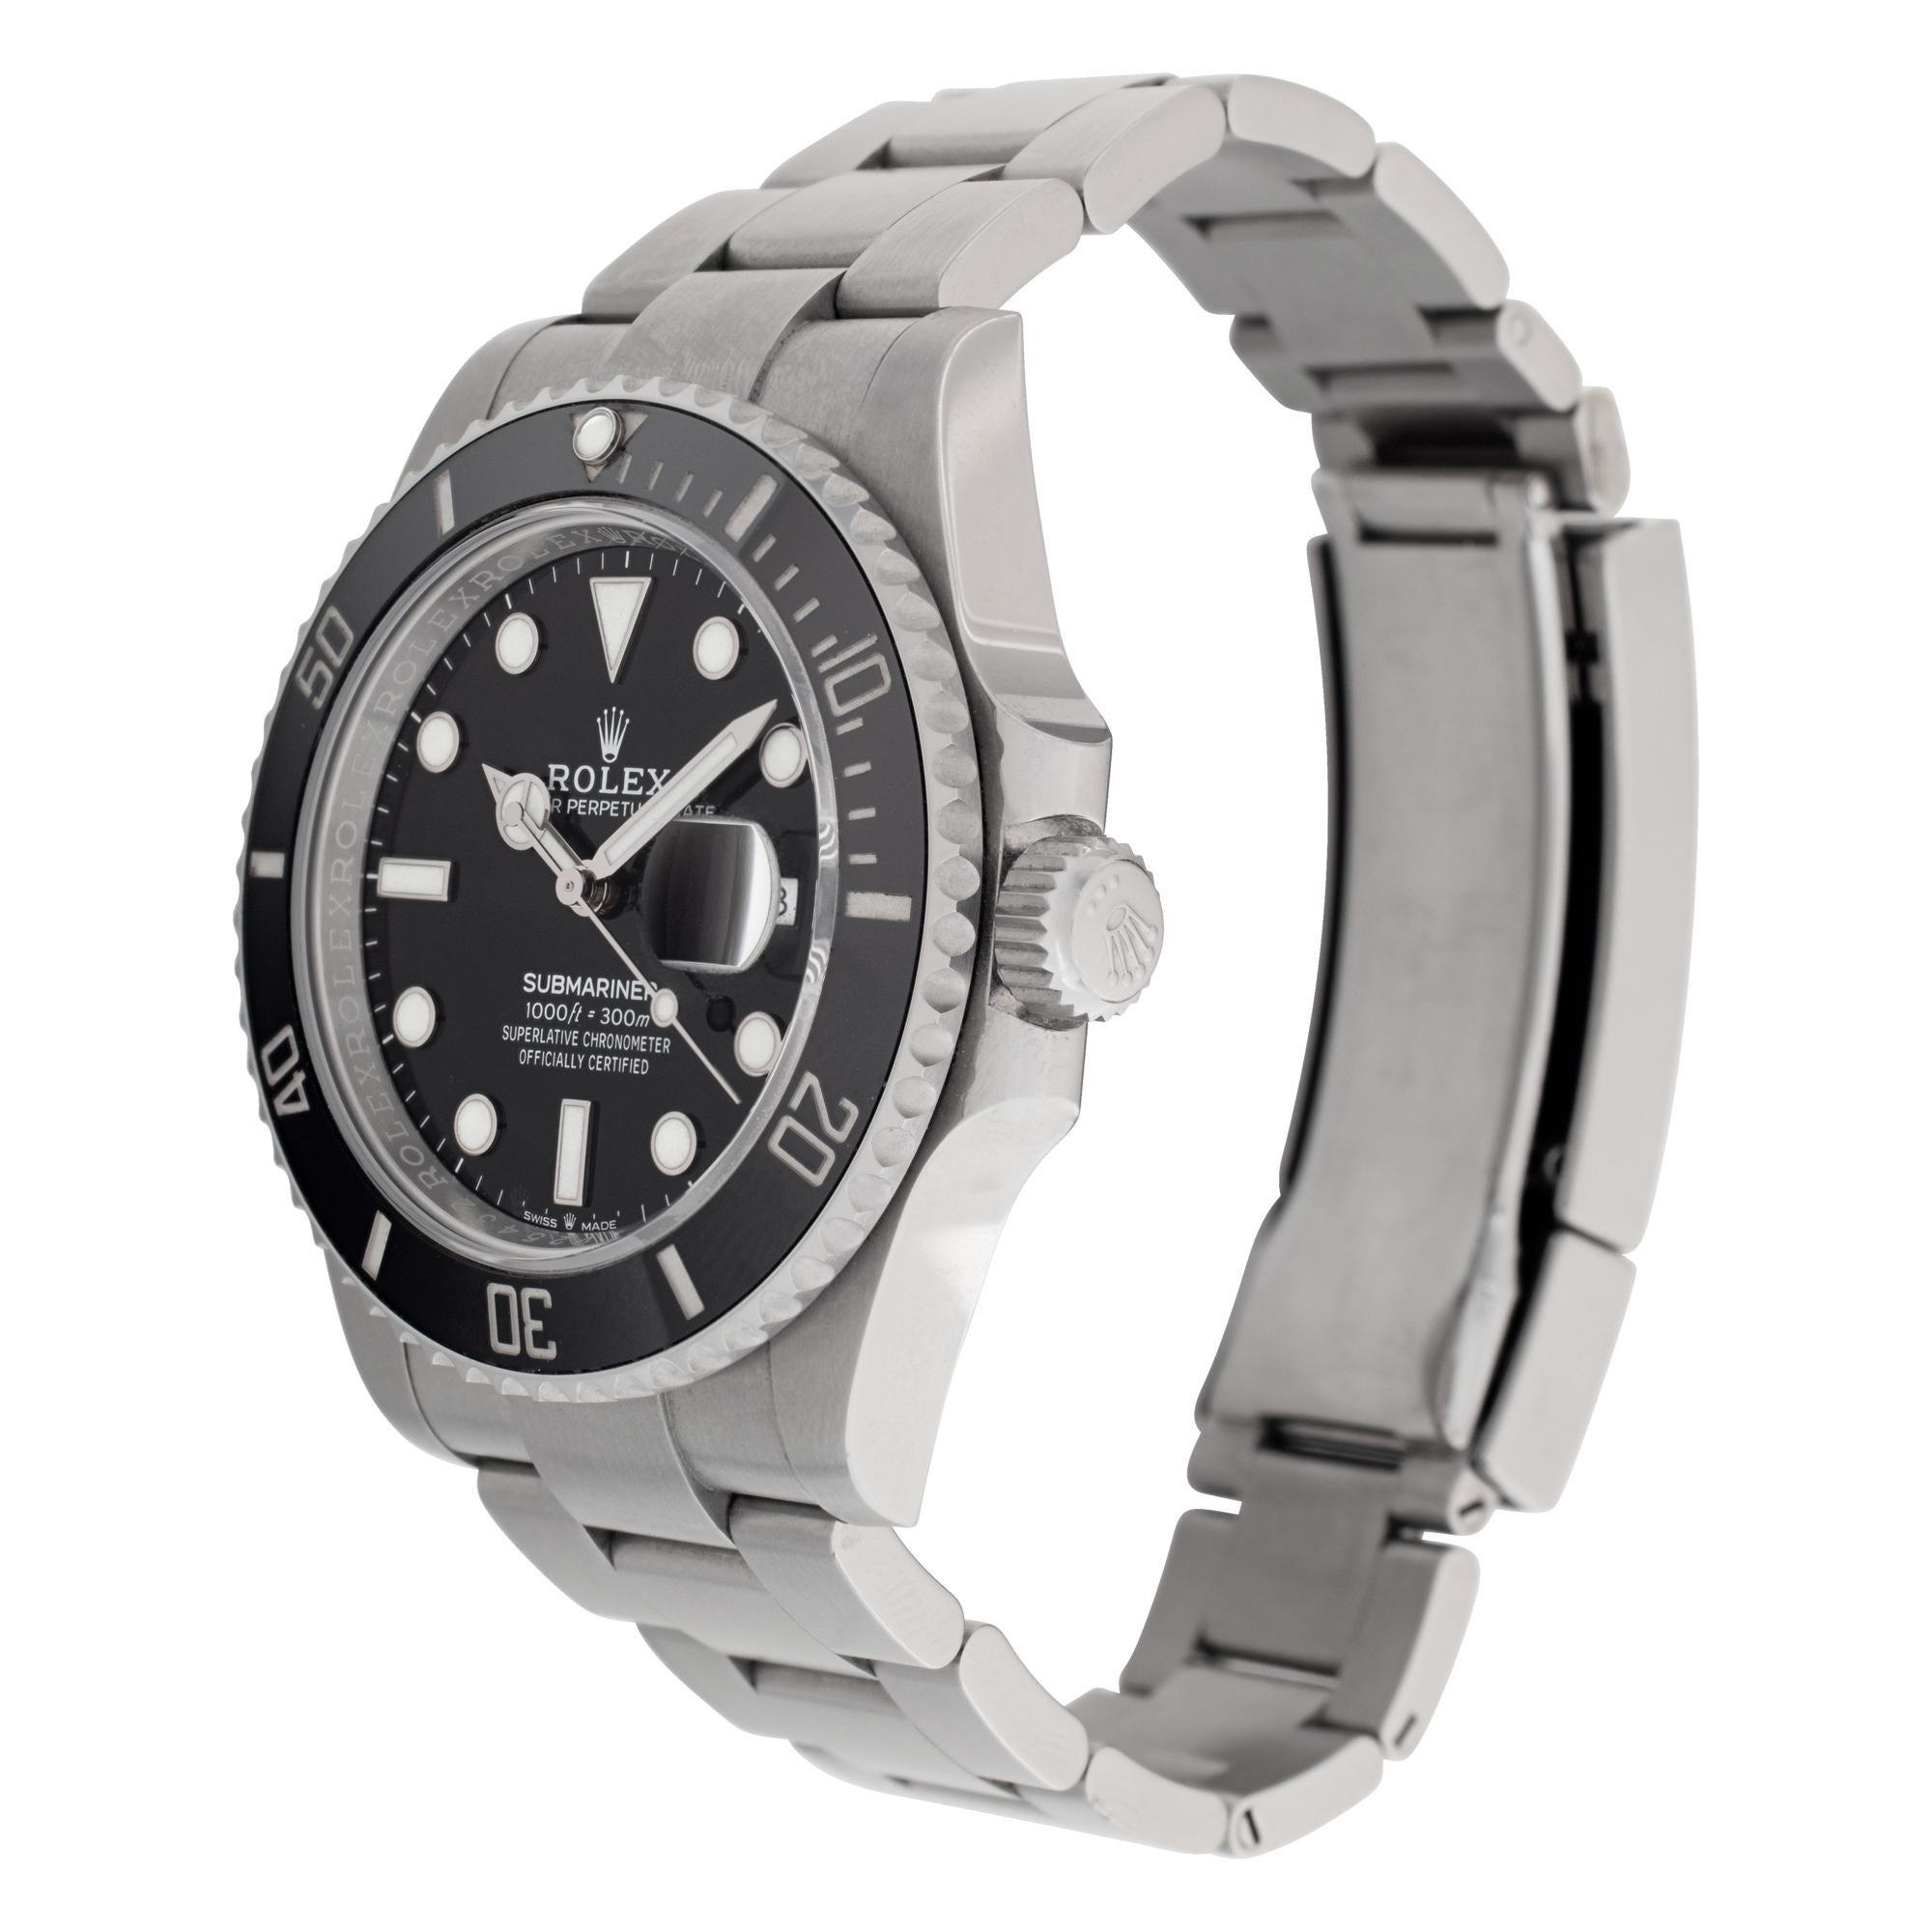 Rolex Submariner 41 in stainless steel with black ceramic bezel & dial . Auto w/ sweep seconds and date. 41 mm case size. **Bank wire only at this price** Ref 126610. Circa 2020s. Fine Pre-owned Rolex Watch. Certified preowned Sport Rolex Submariner